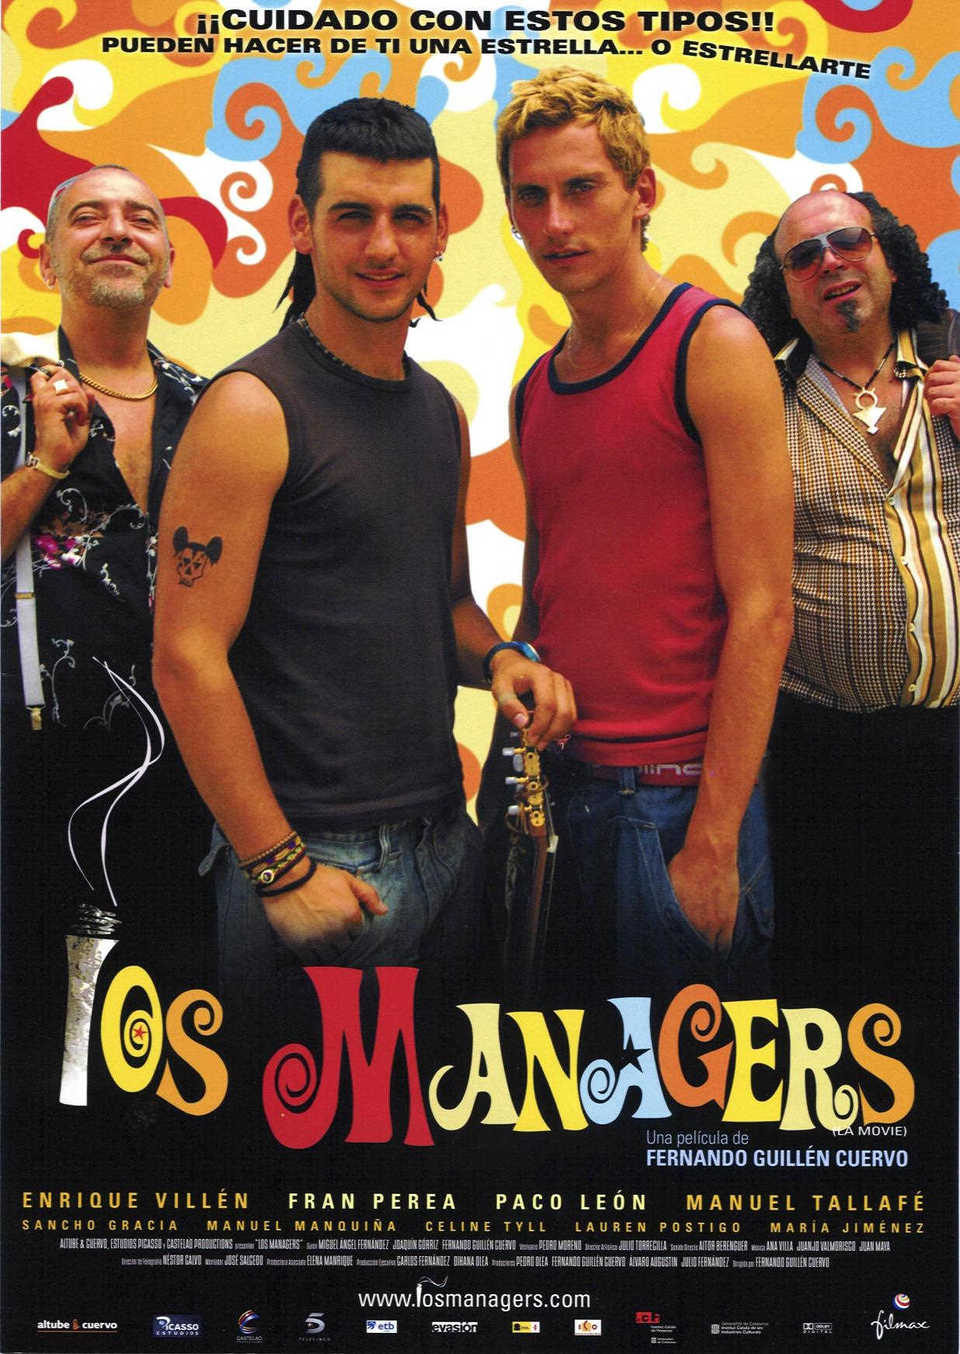 Poster of Los managers - España